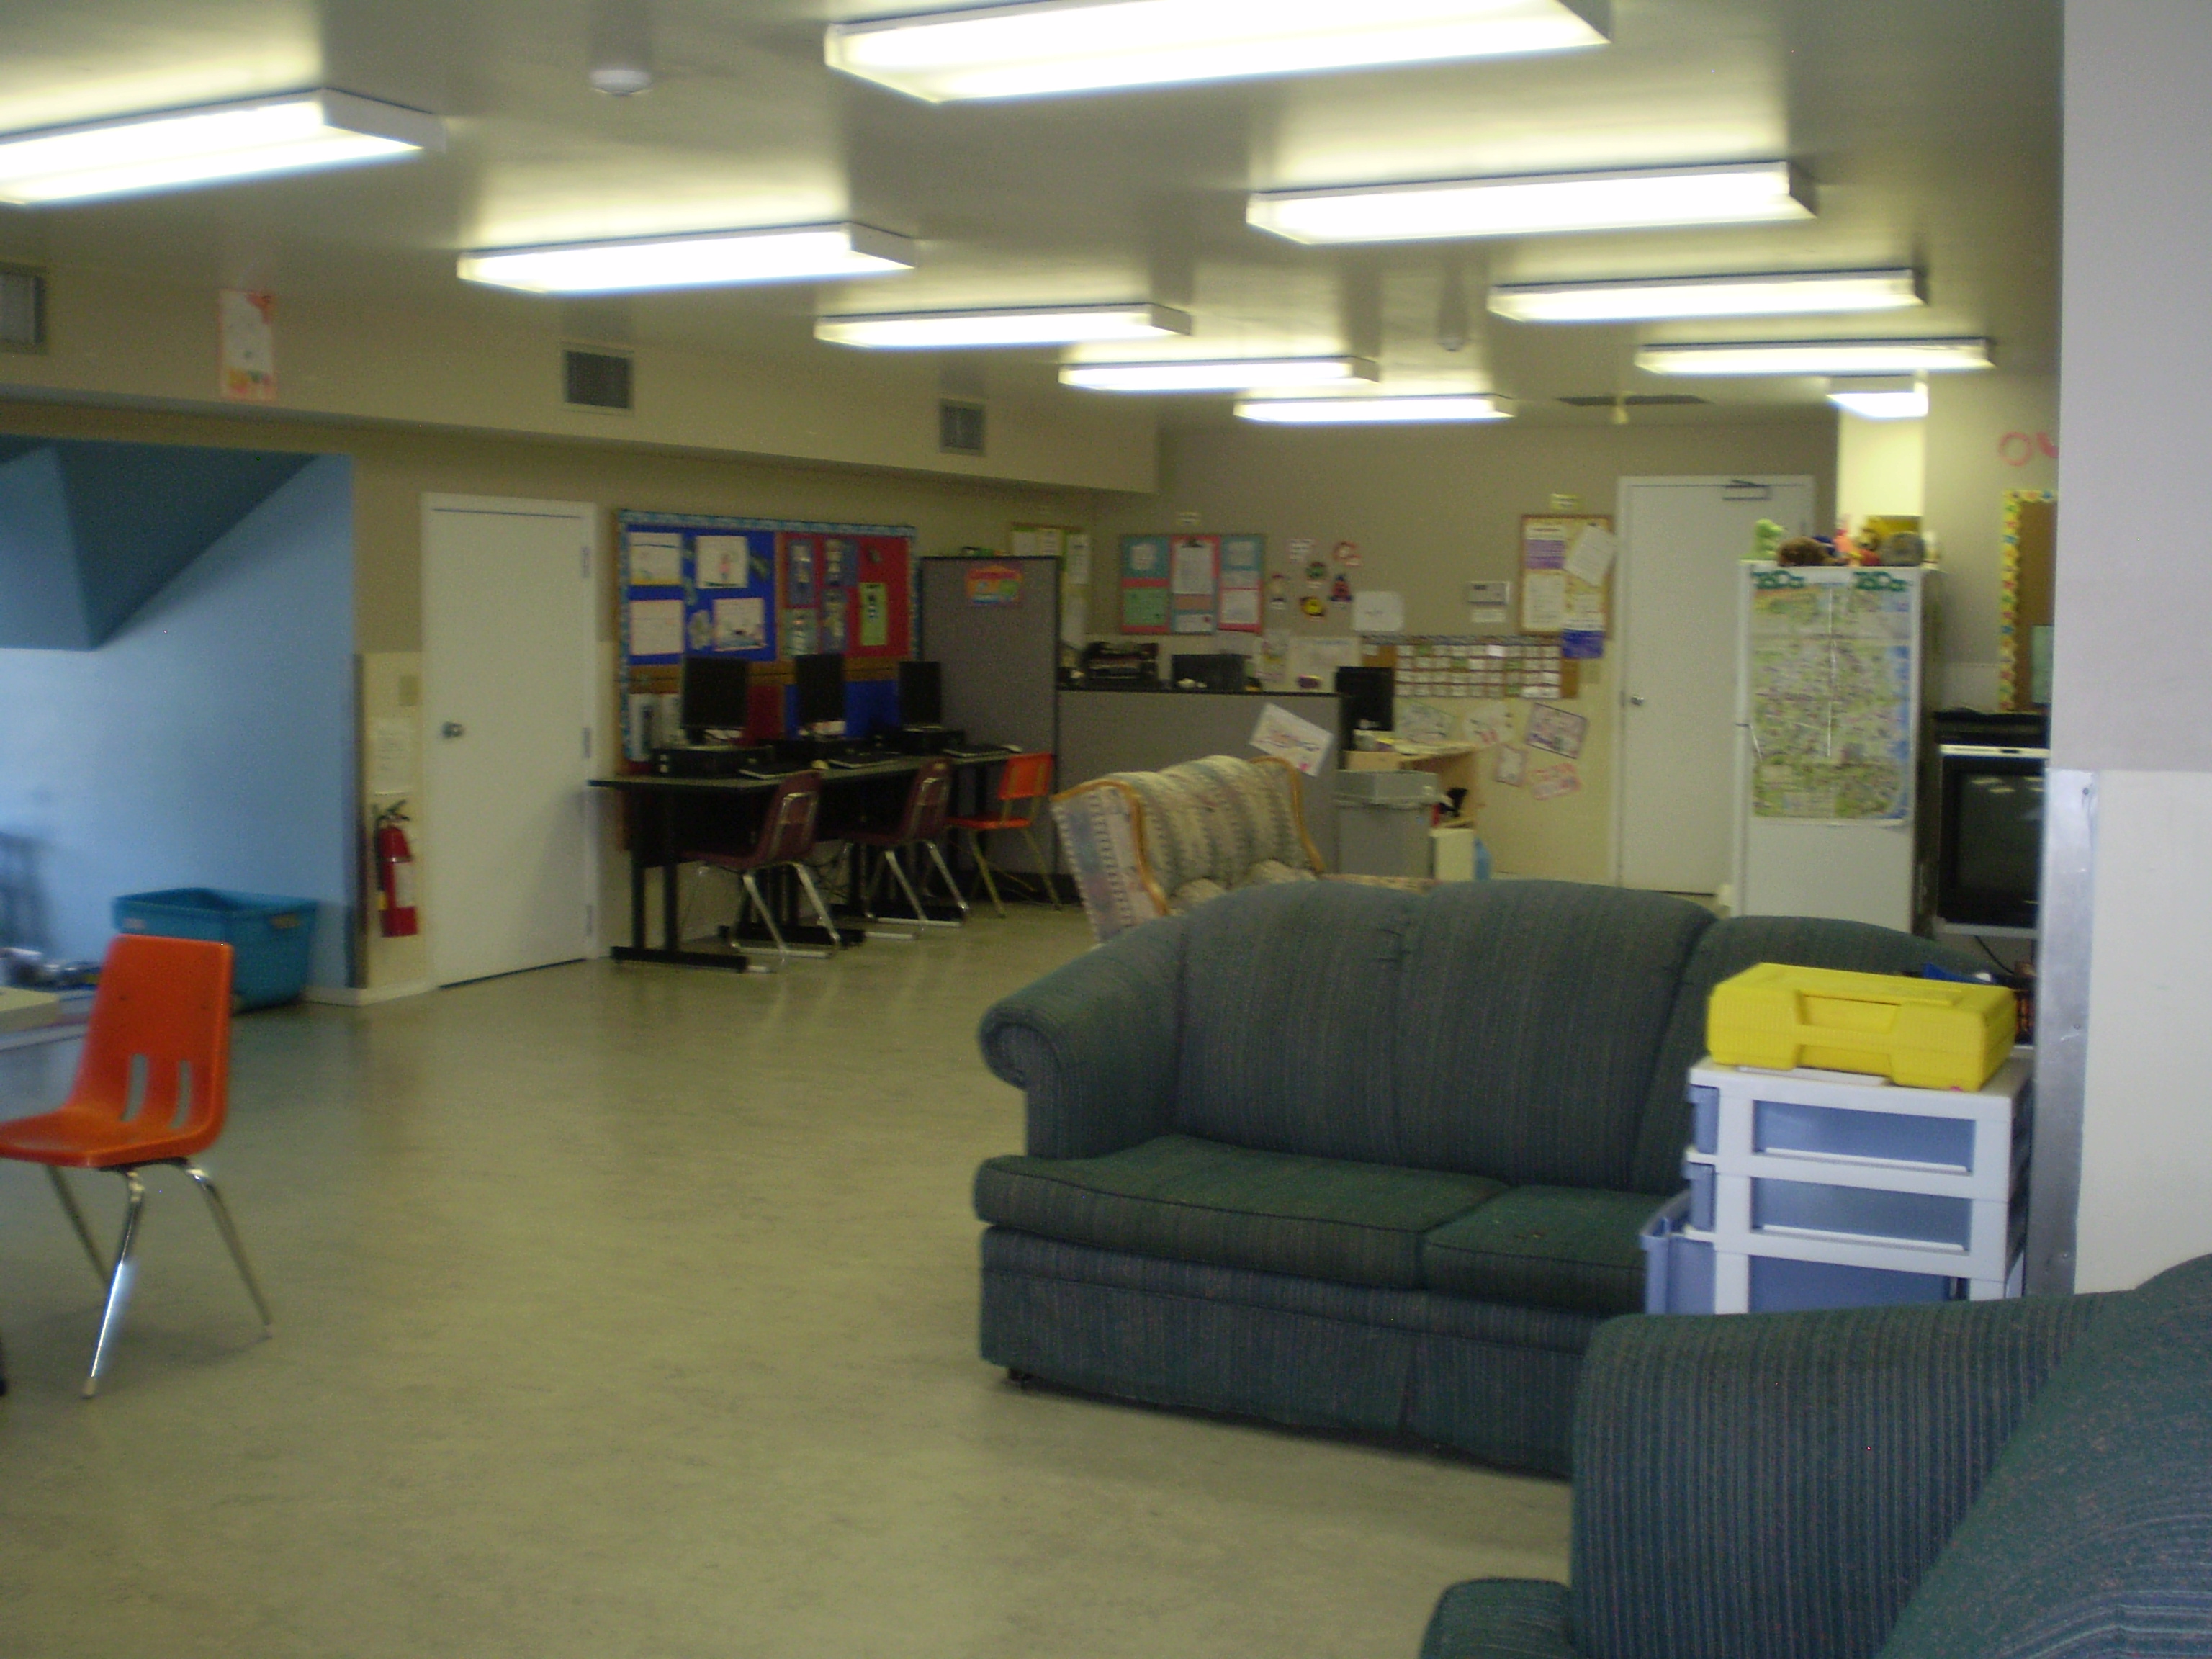 Class Room on the second floor